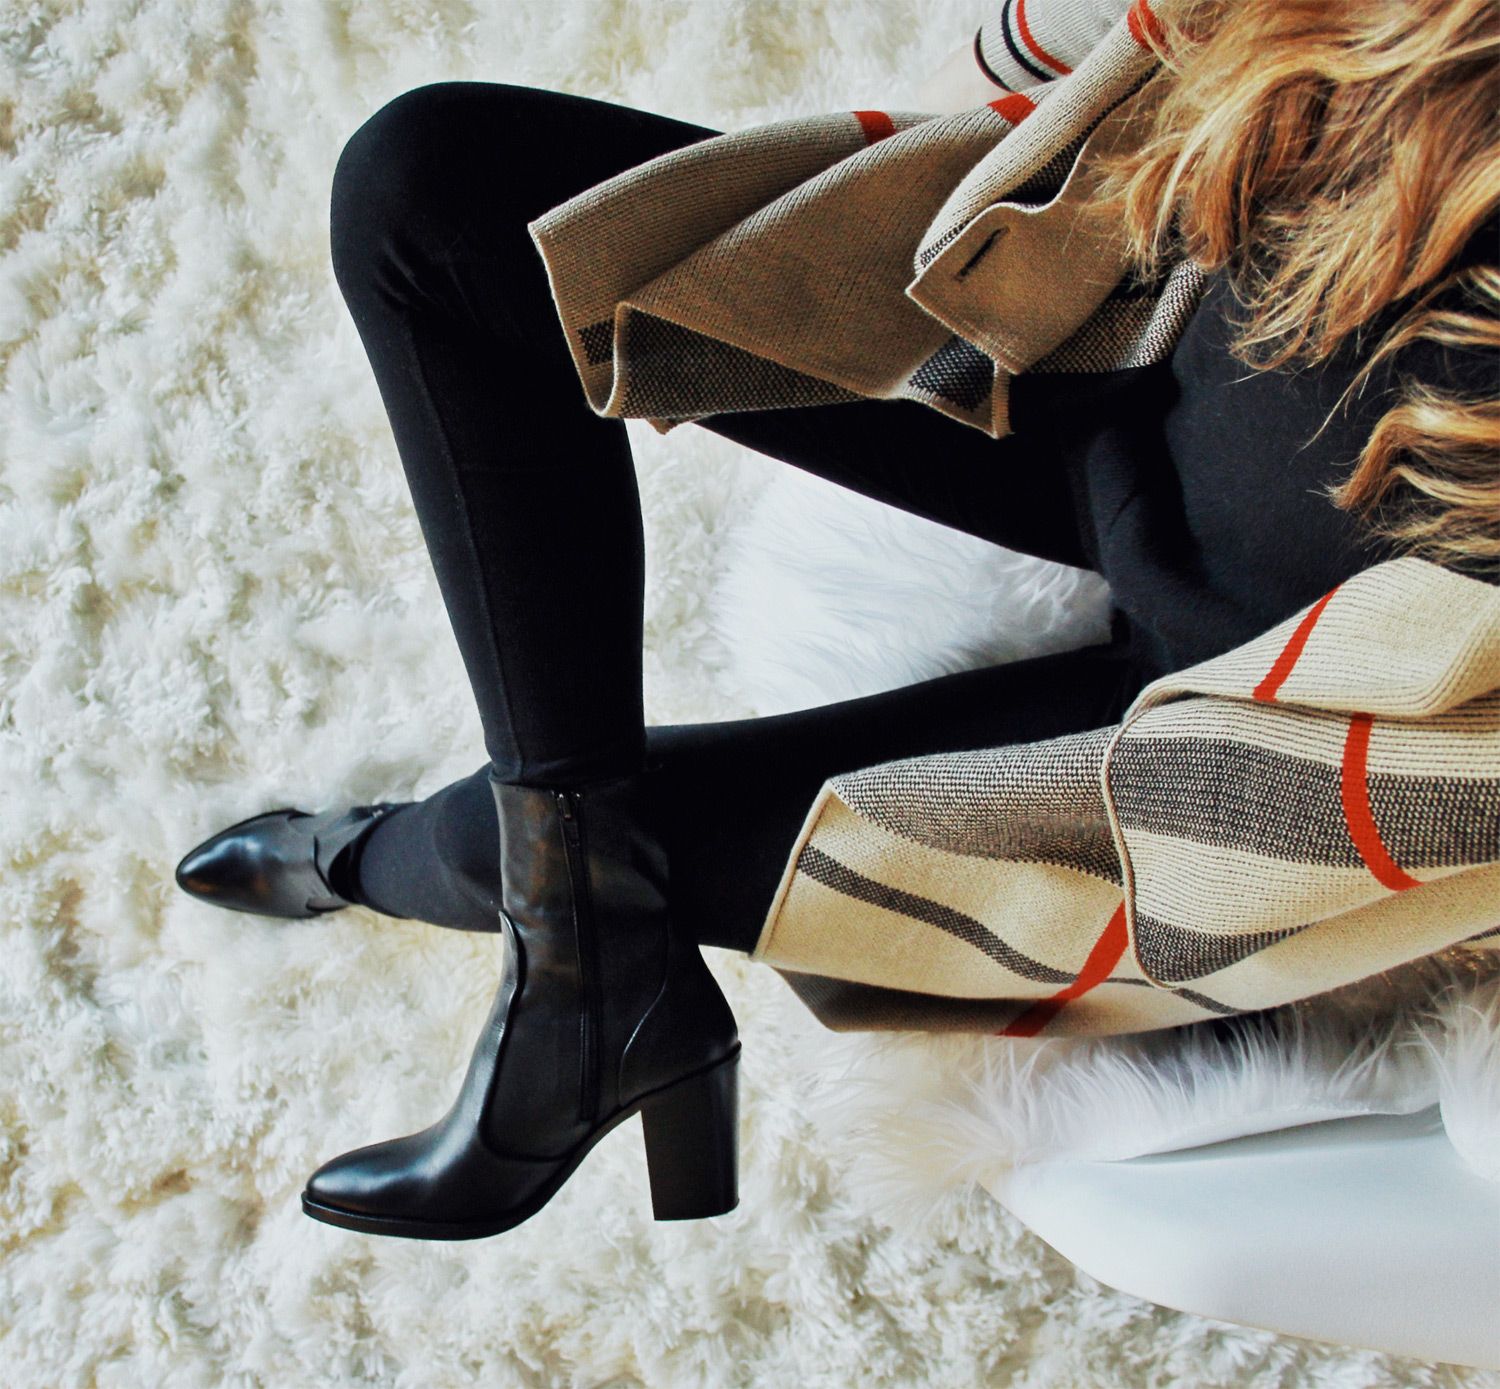 Daily Inspo, Outfit Inspiration, Comfort Look, Black Booties, Everyday Outfit, Casual Outfit